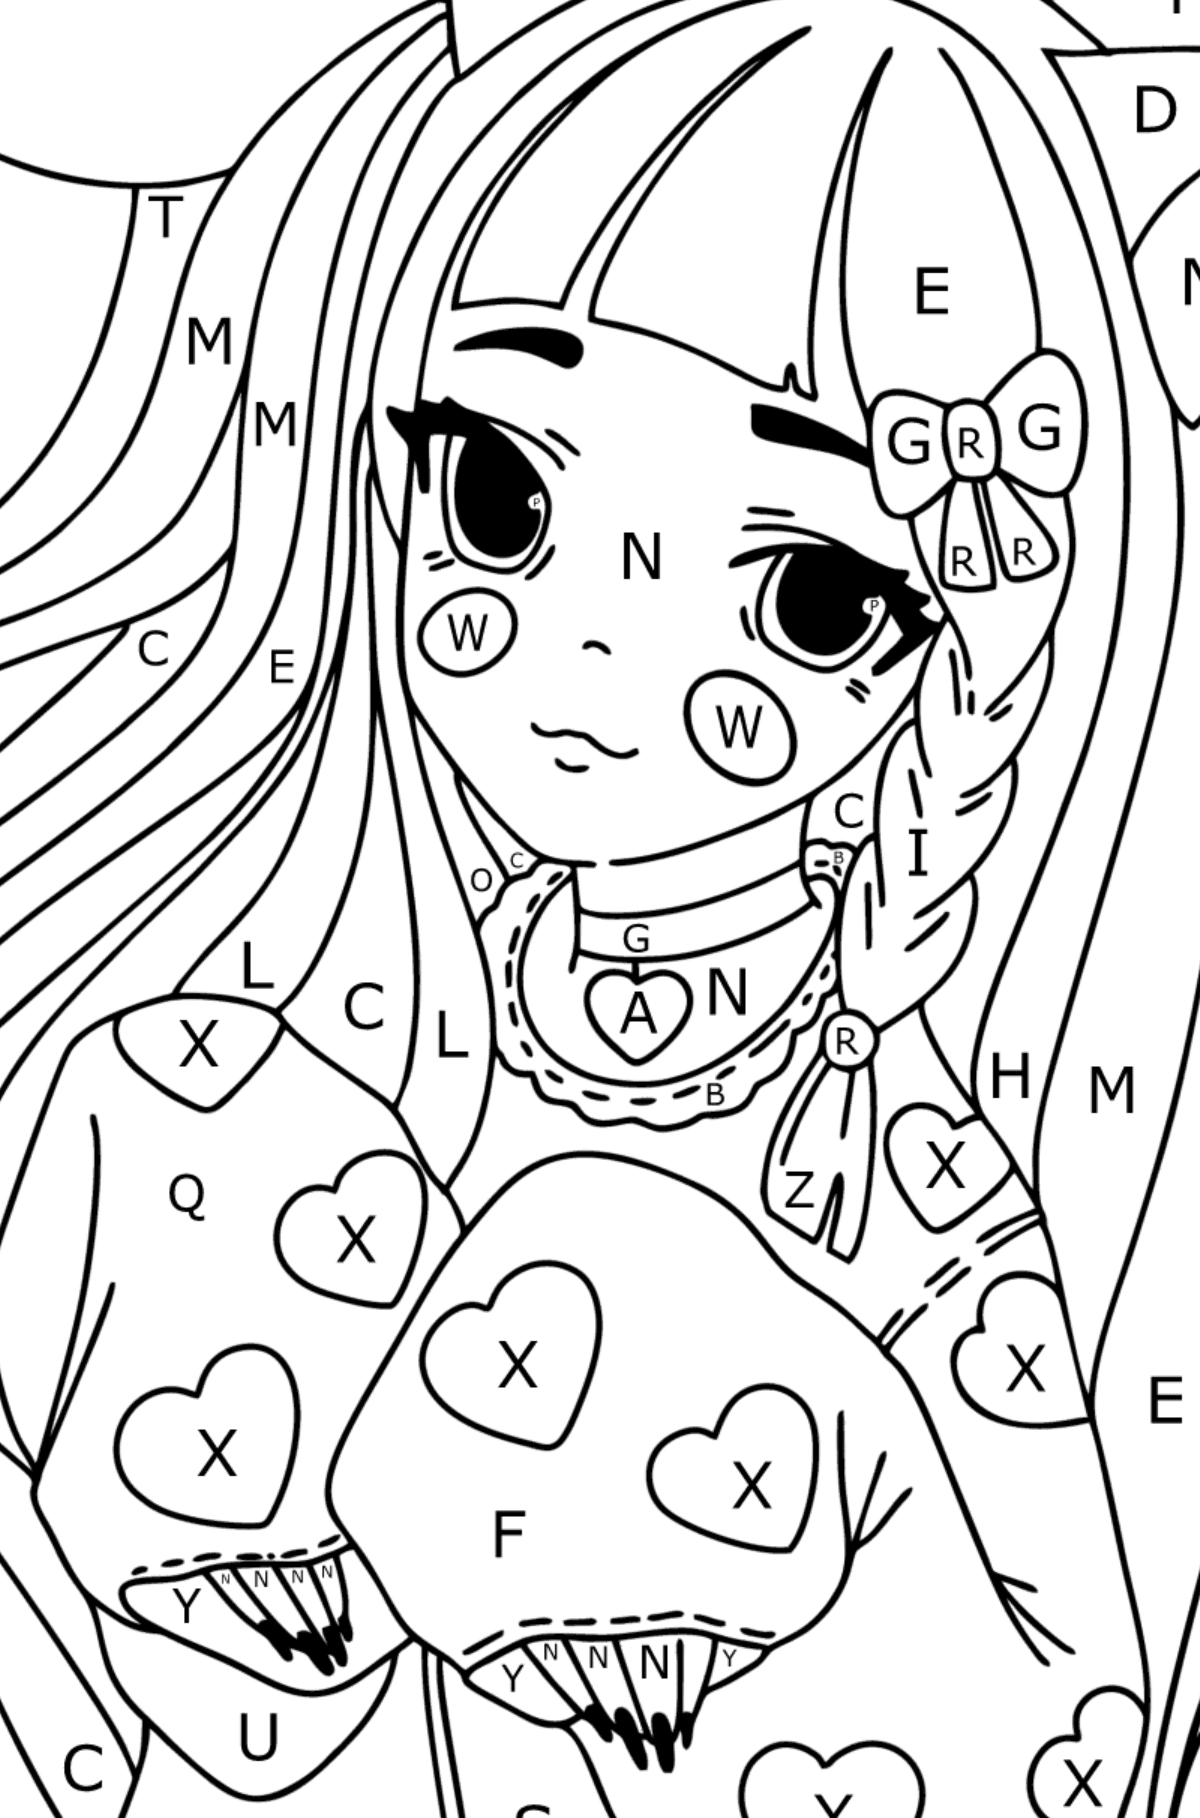 Anime girl with ears and paws coloring page - Coloring by Letters for Kids